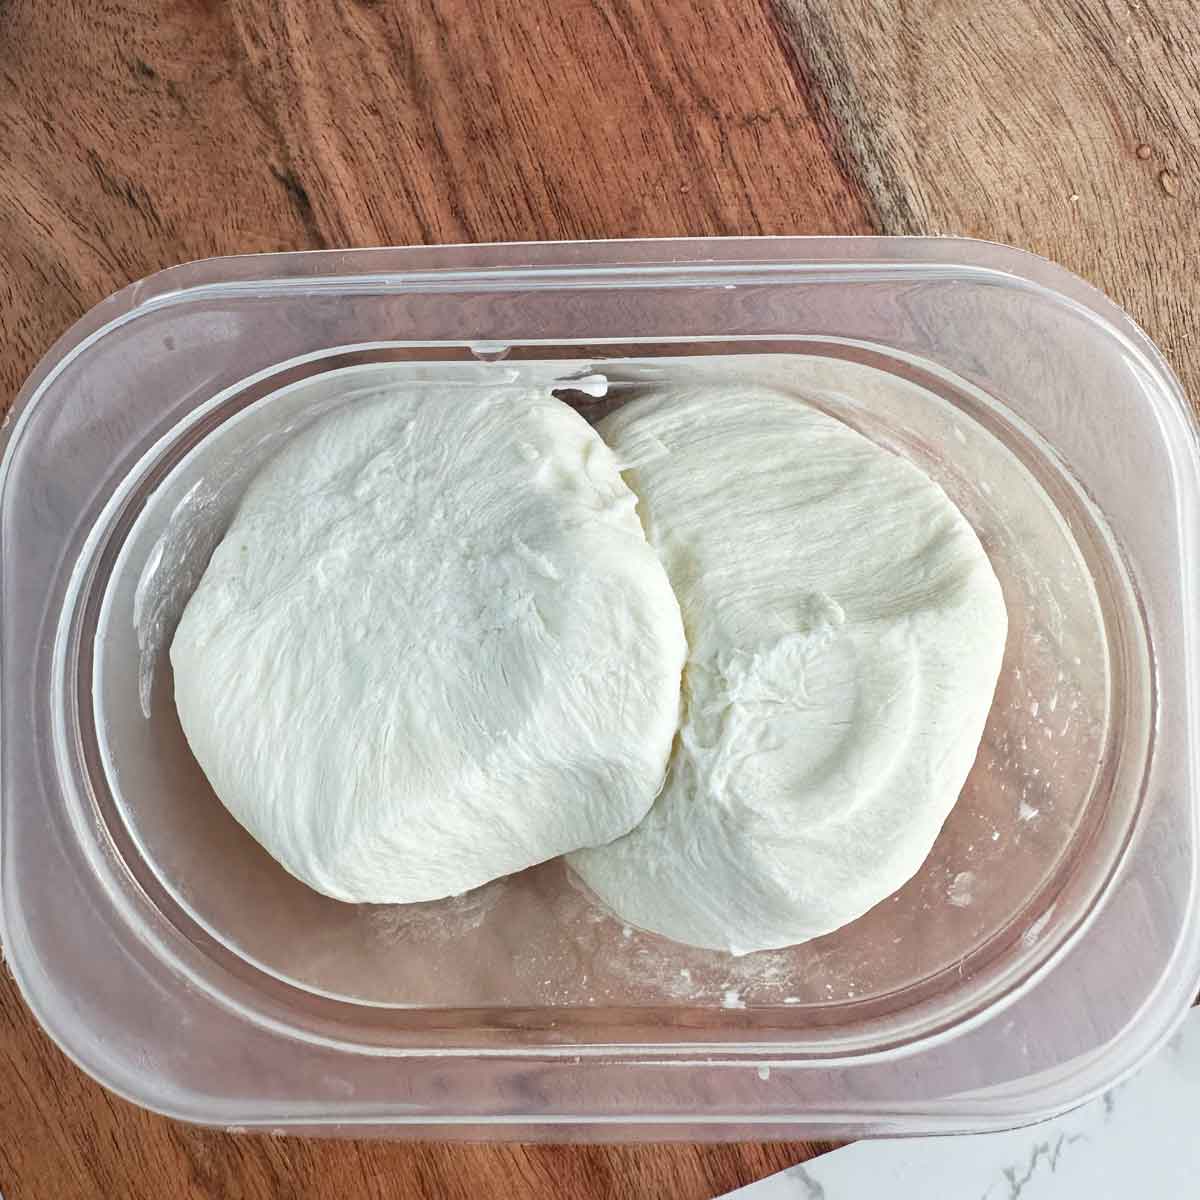 defrosted burrata cheese.